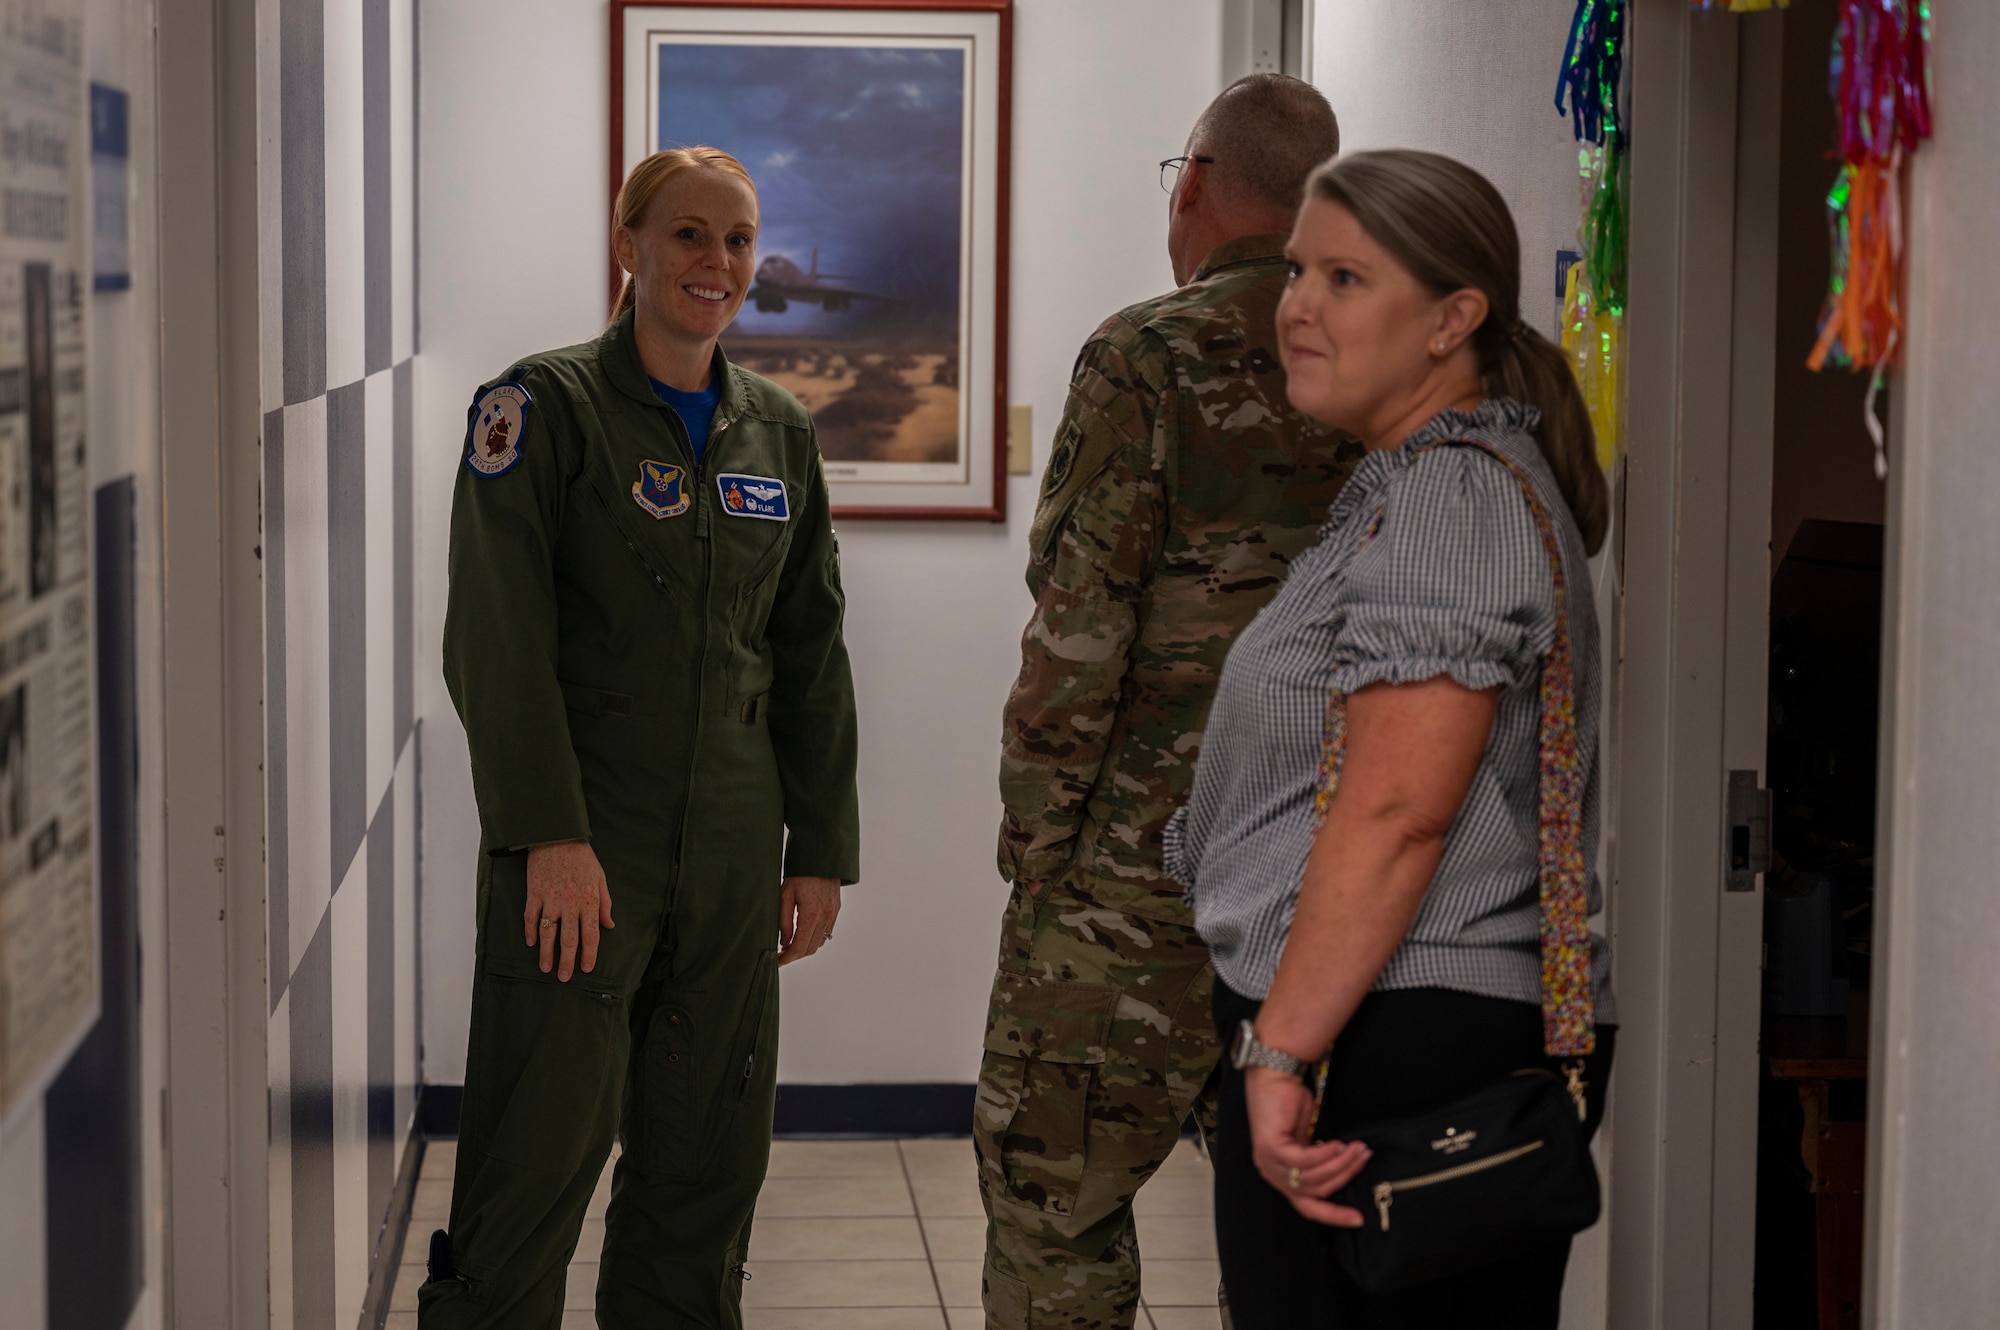 Lt. Col. Kristen Jenkins, 28th Bomb Squadron commander, gives Lt. Gen. Mark Weatherington, Air Force Global Strike Command deputy commander, and his spouse, Stephanie Weatherington, a tour of the 28th BS at Dyess Air Force Base, Texas, Sept. 23, 2022. Weatherington had once commanded the 28th BS before relinquishing command in 2008. While visiting the squadron, he was given a brief on their updated training. (U.S. Air Force photo by Senior Airman Reilly McGuire)